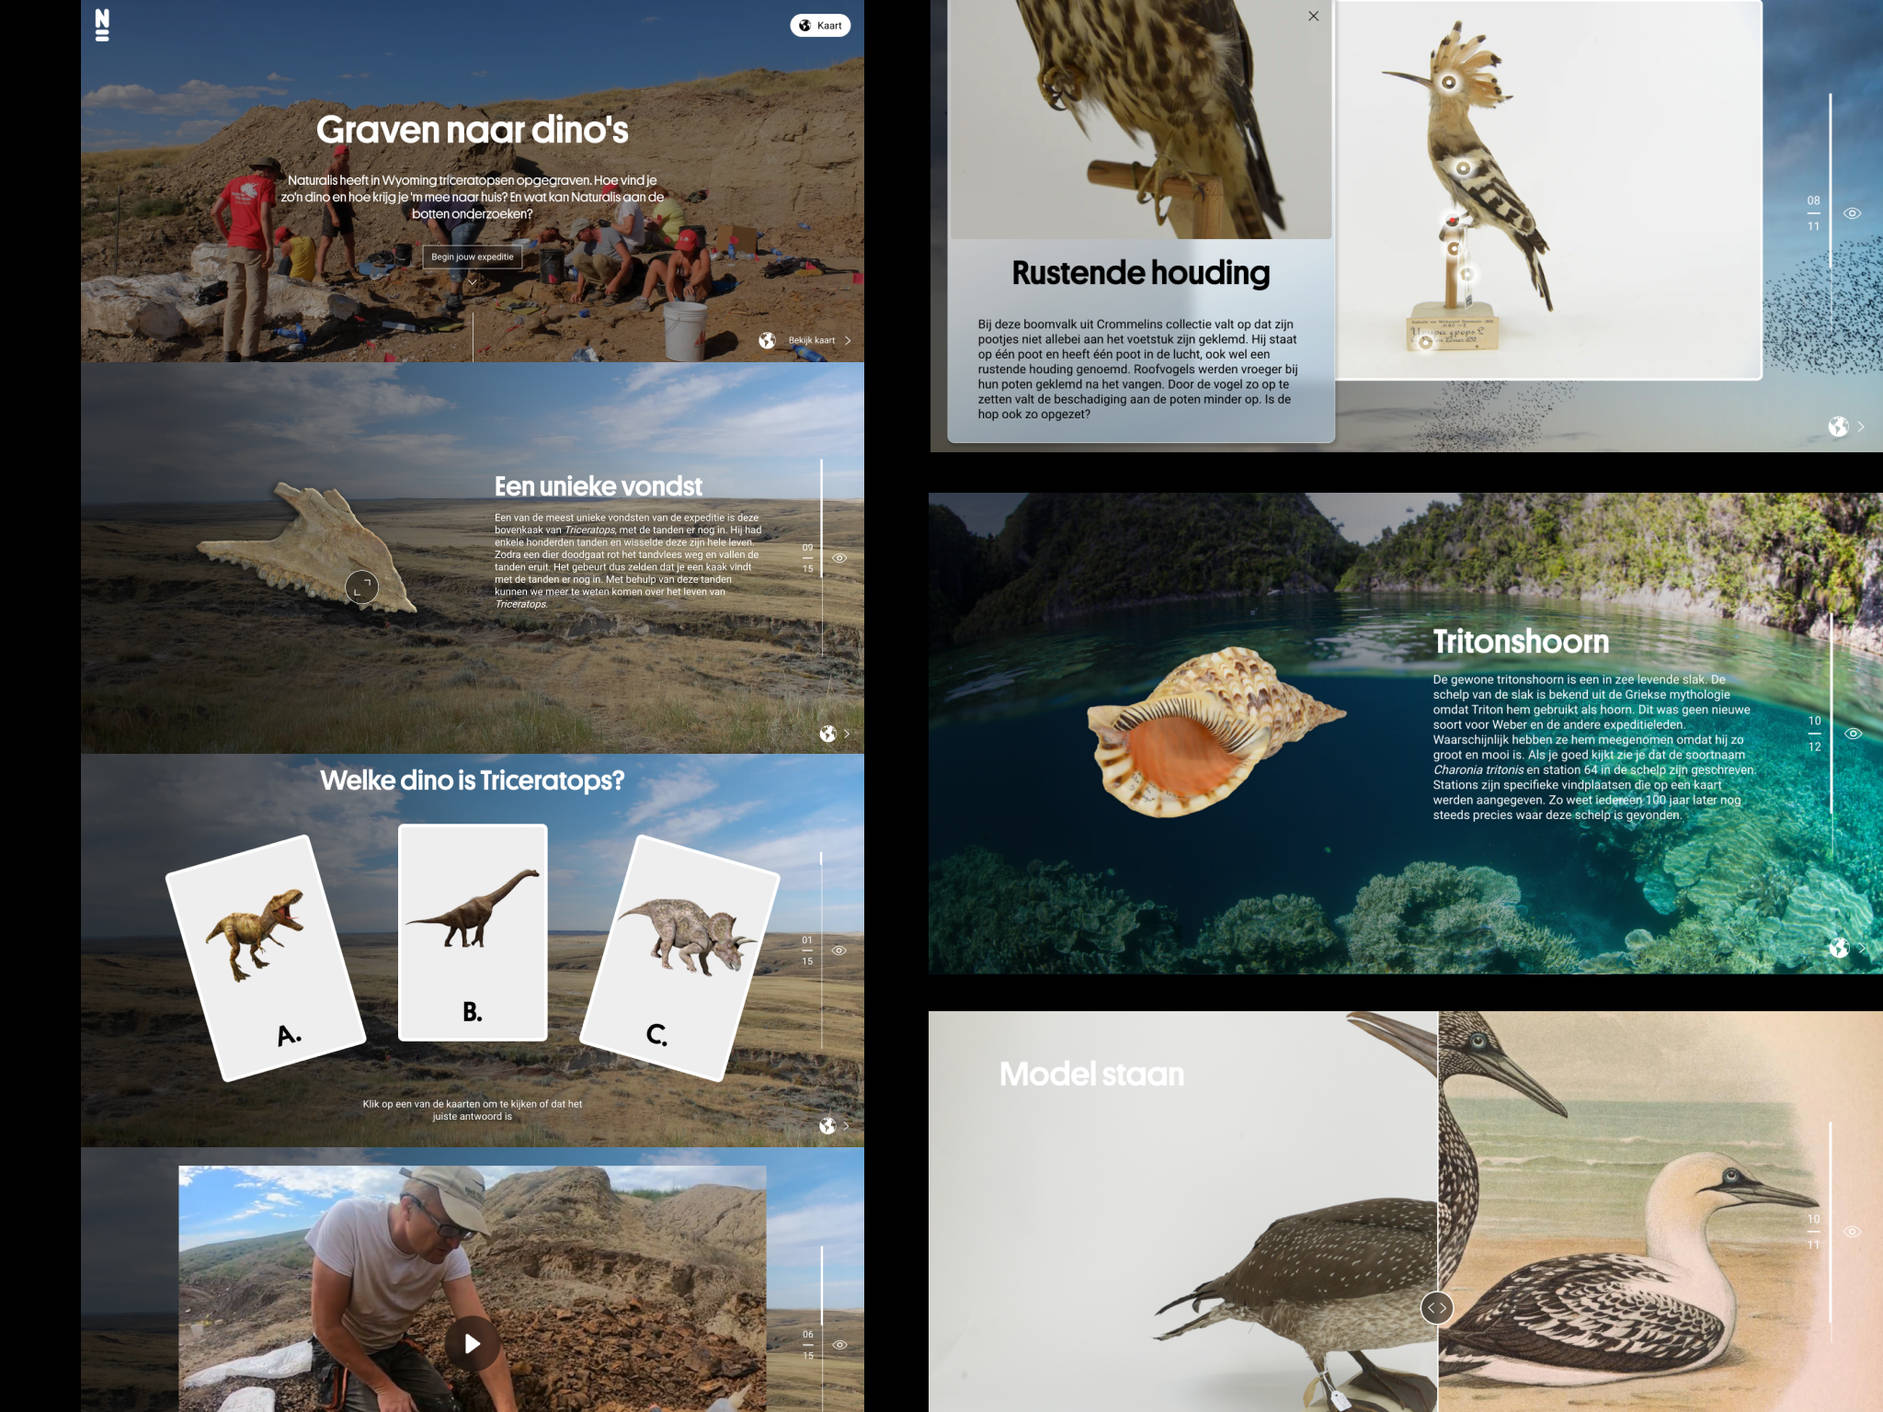 Examples expeditions from Naturalis online collection